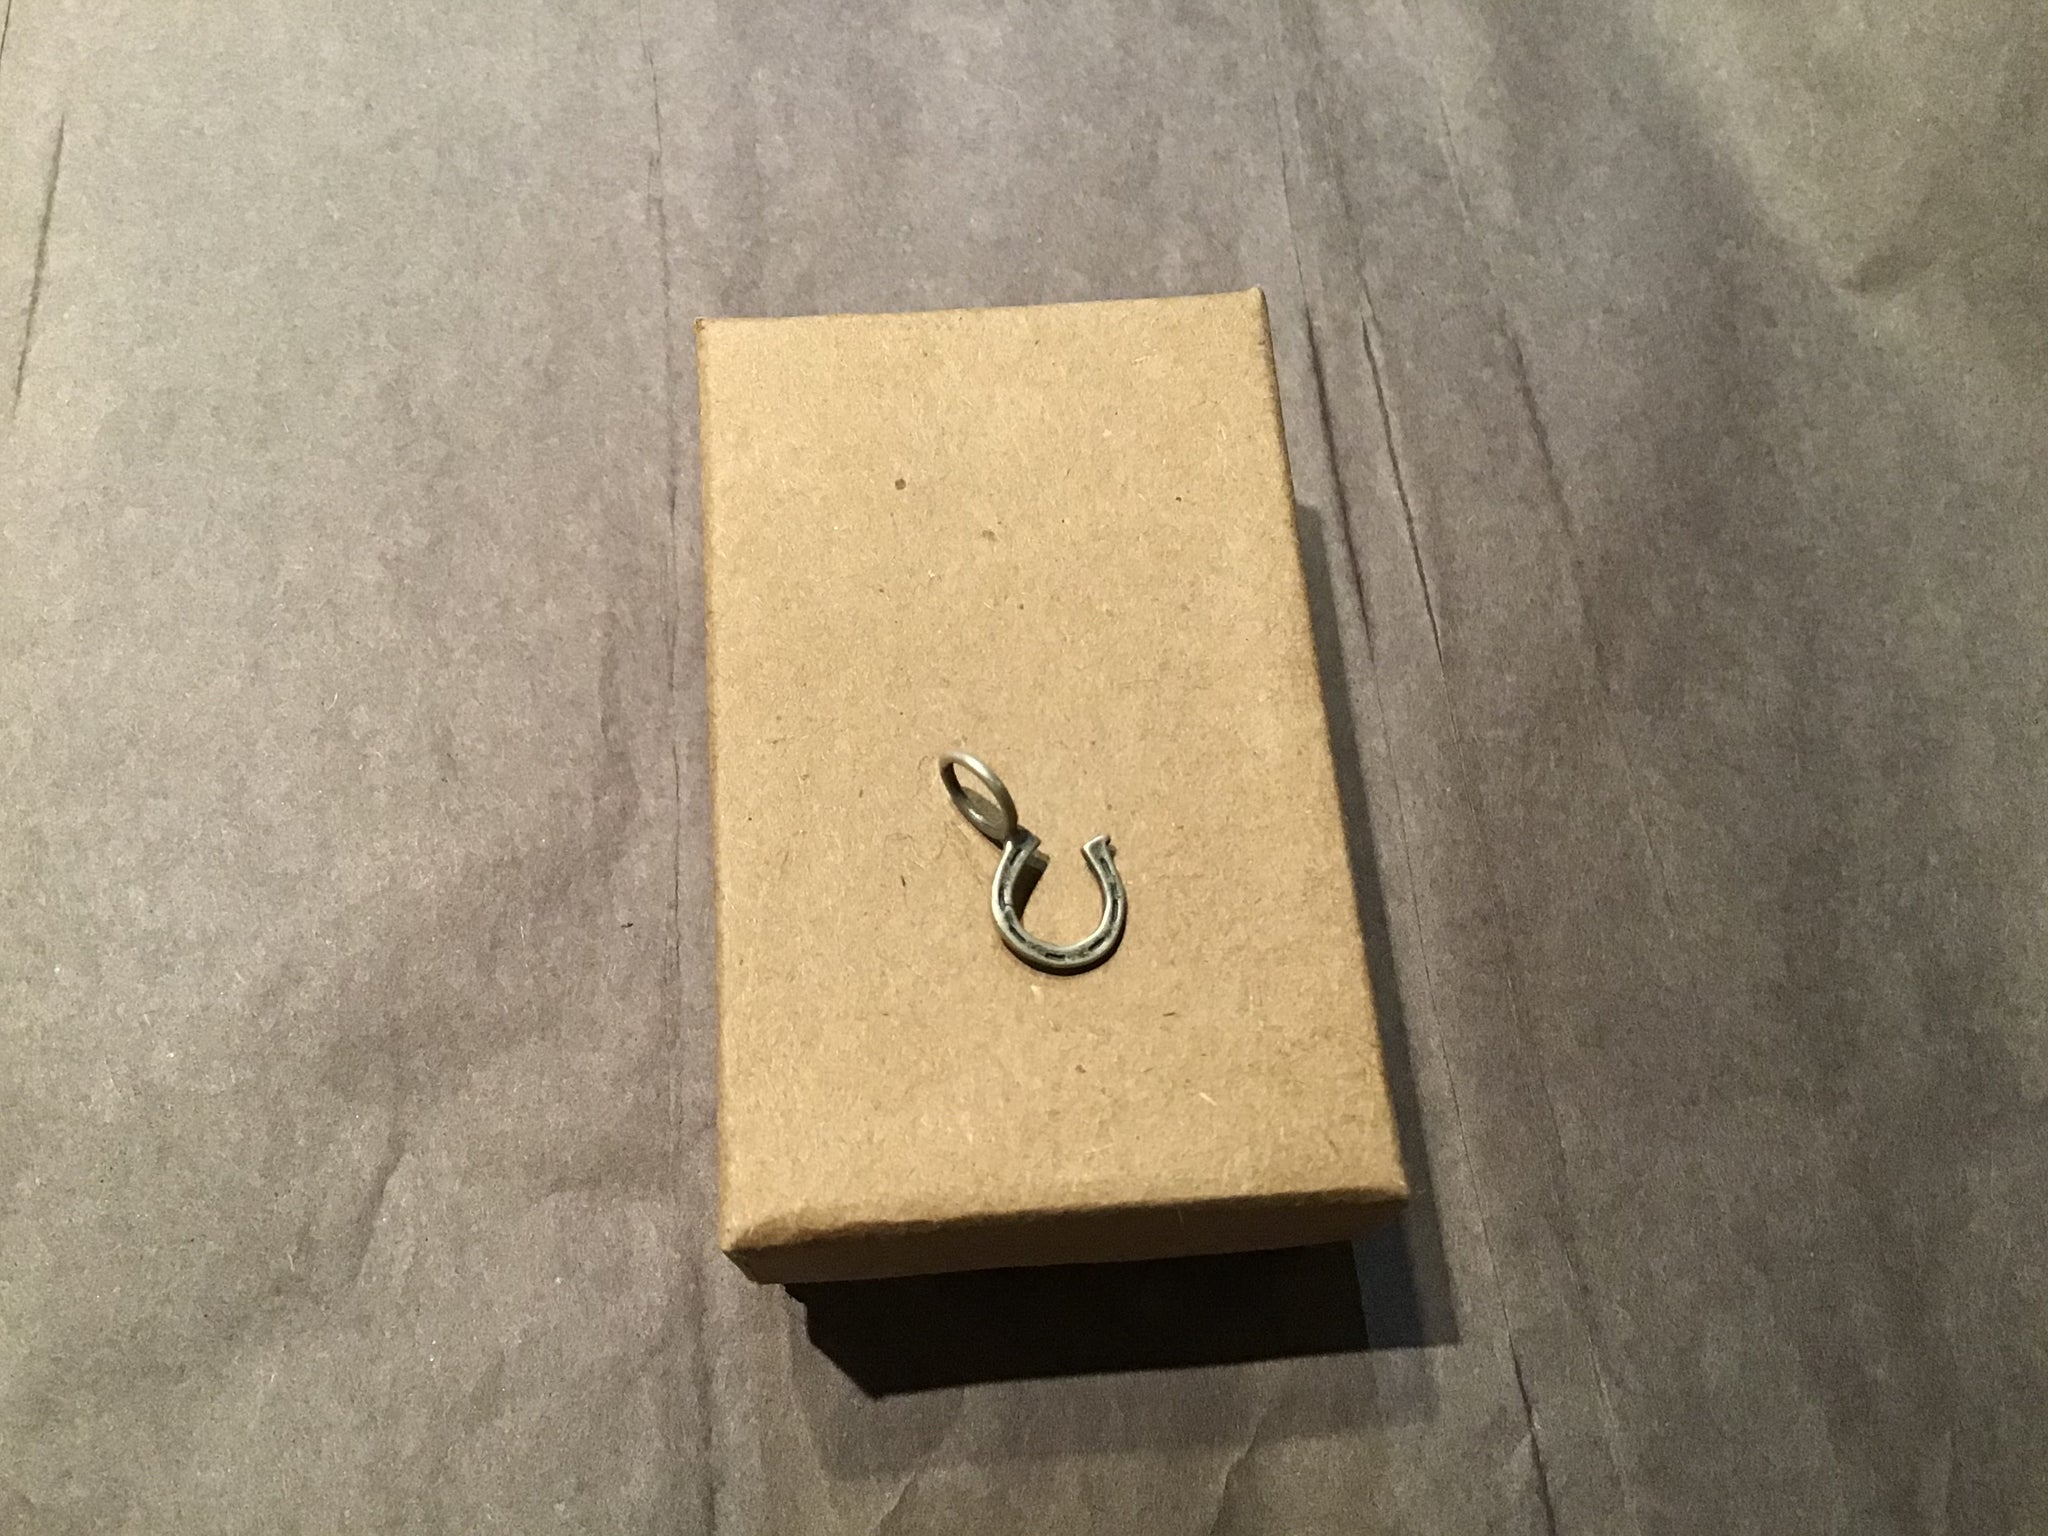 Horseshoe Charm Sterling Silver